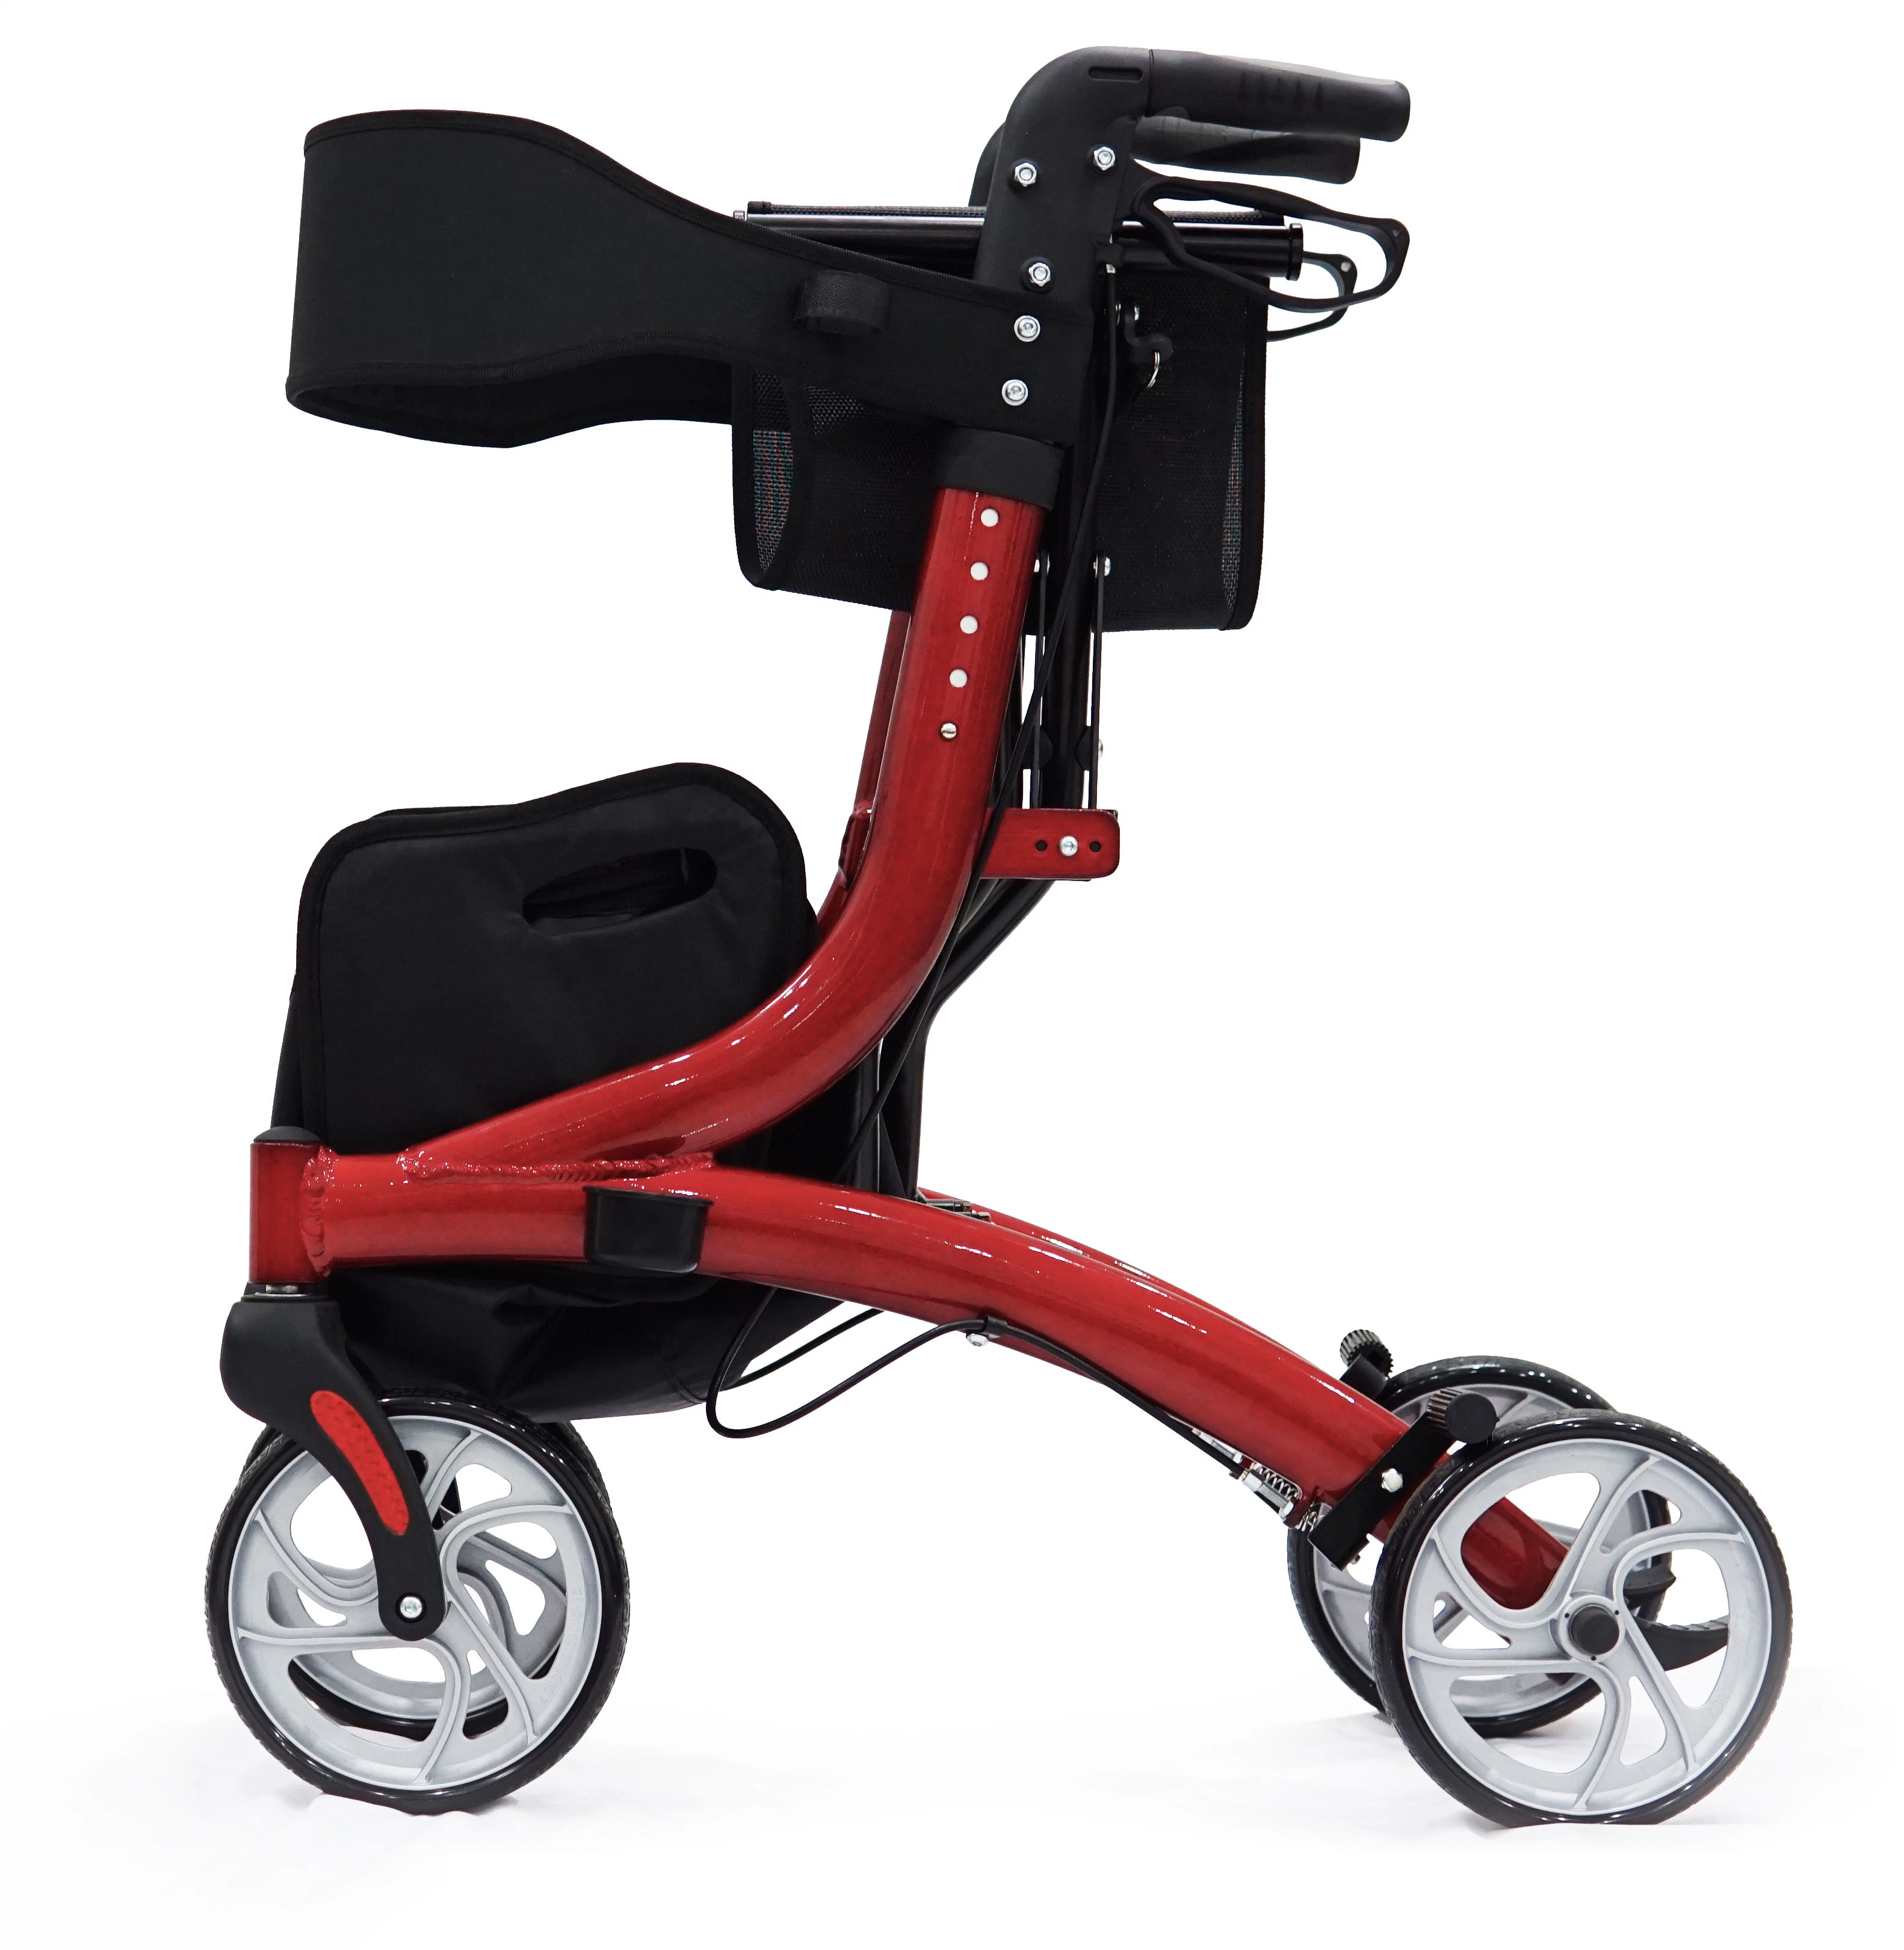 Heinsy Medical RW-8860 Foldable Rollator Walker with Seat